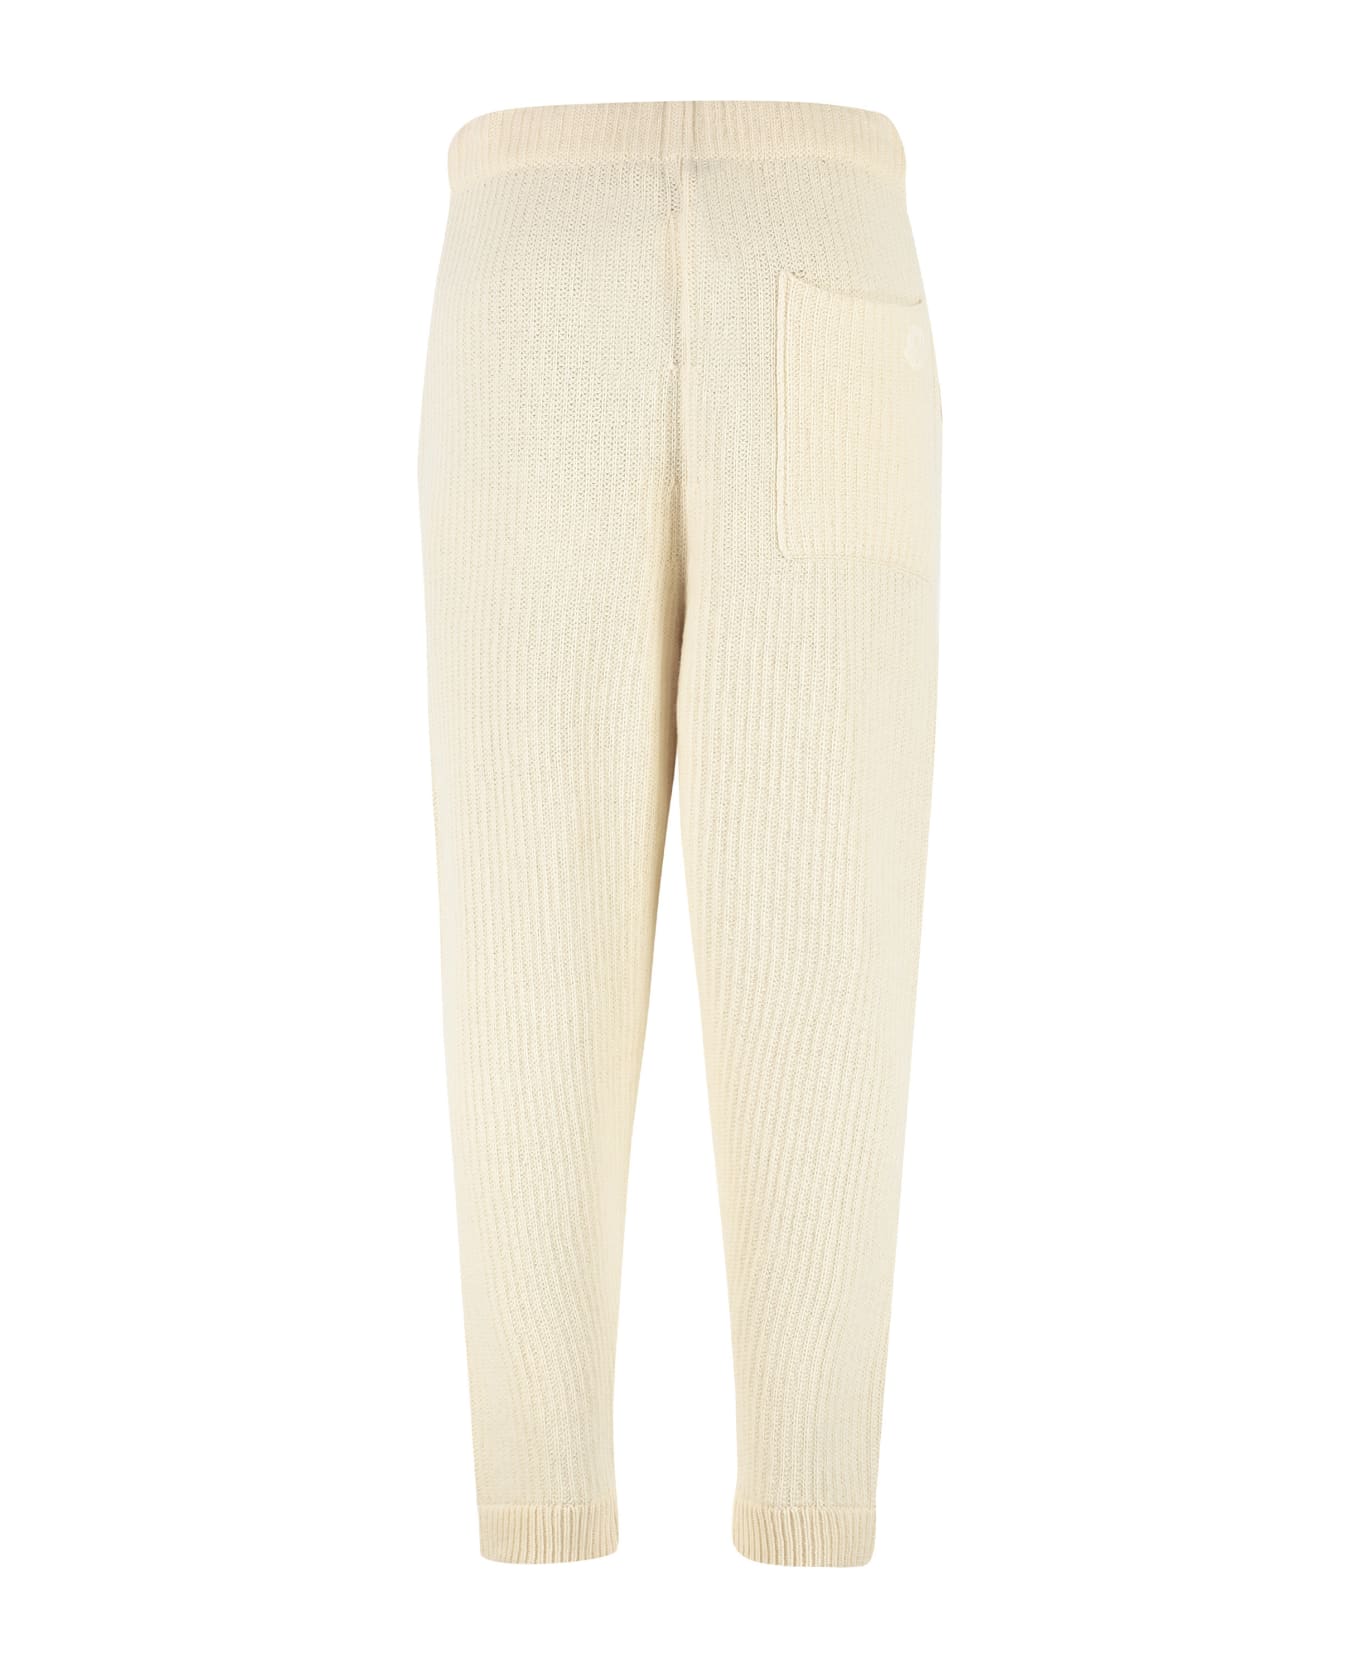 Moncler 2 Moncler 1952 - Rib Knitted Trousers - Ivory